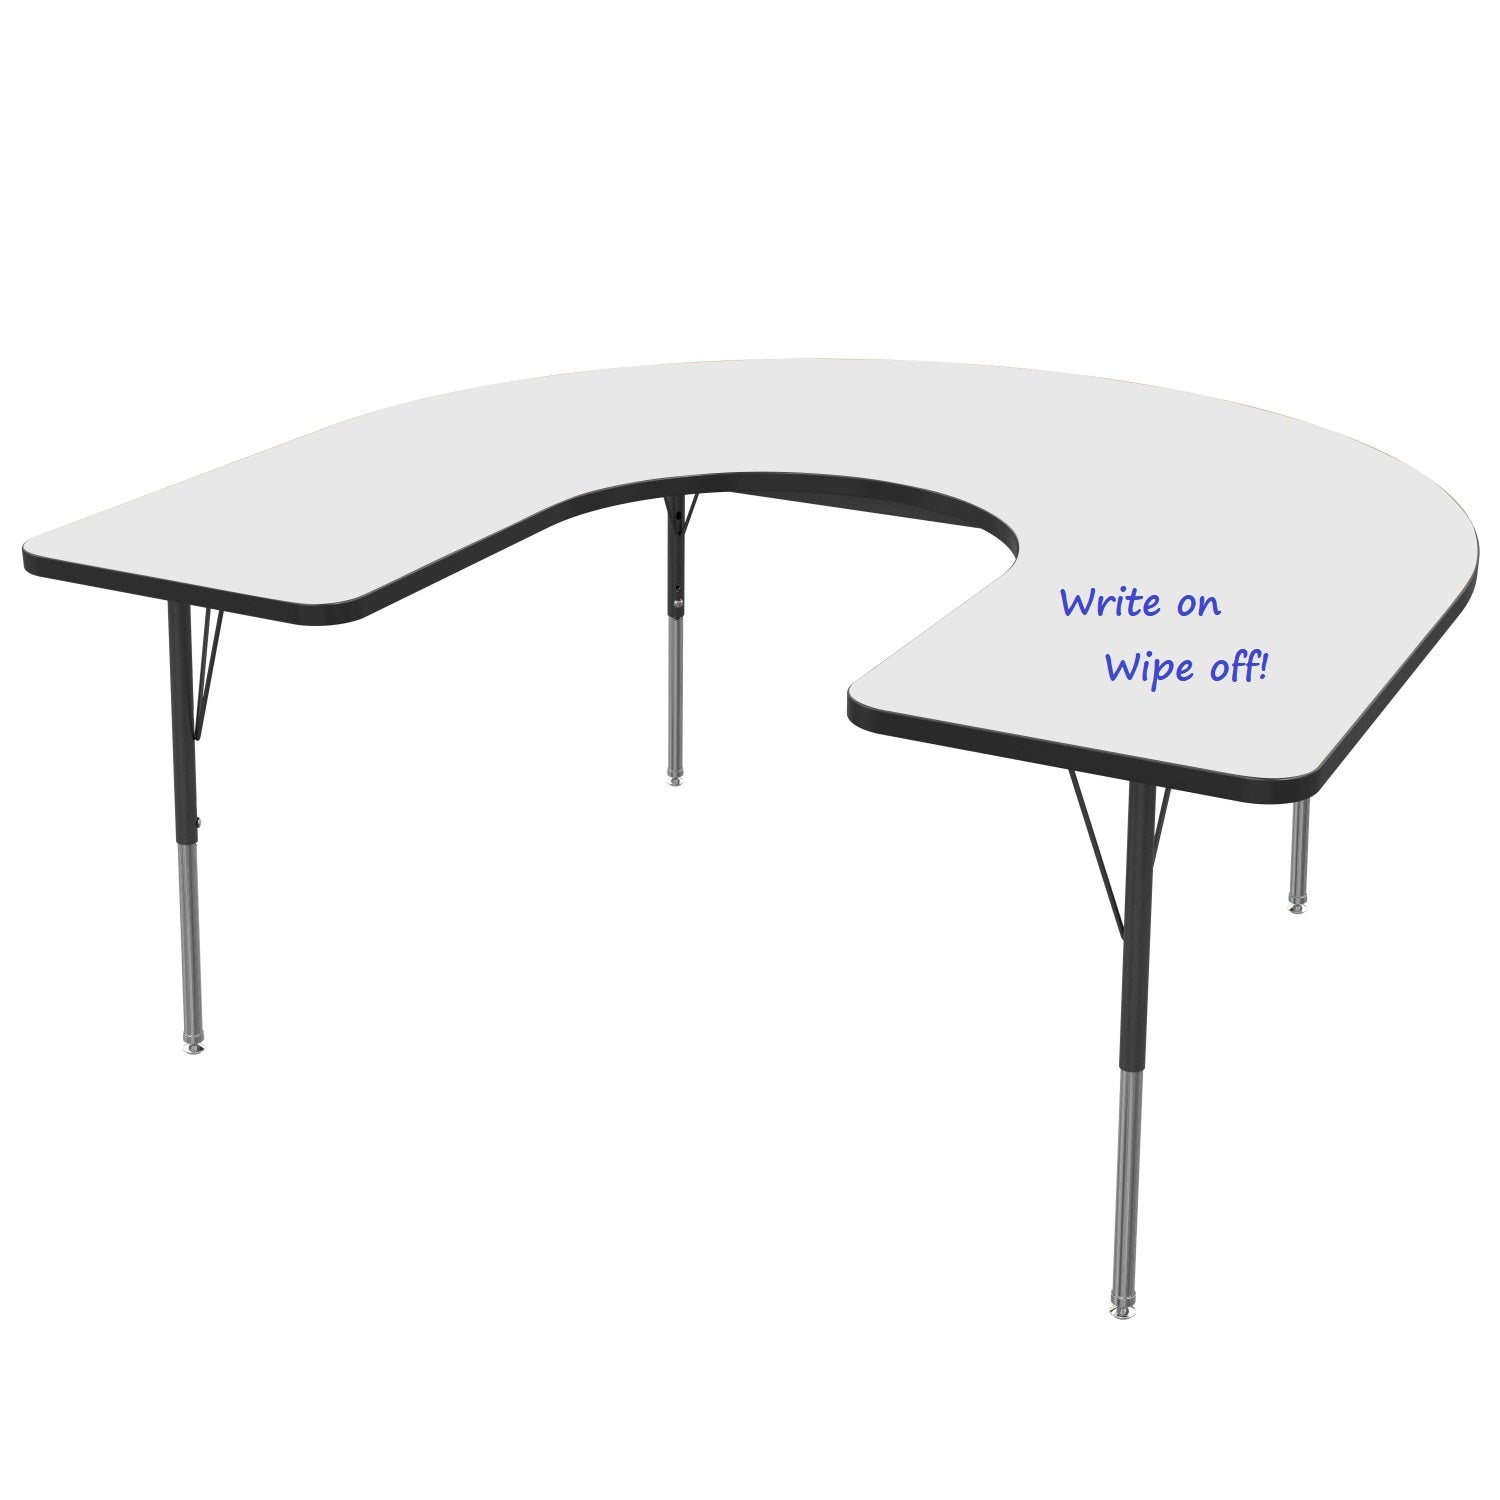 MG Series Adjustable Height Activity Table with White Dry Erase Markerboard Top, 48" x 72" Horseshoe